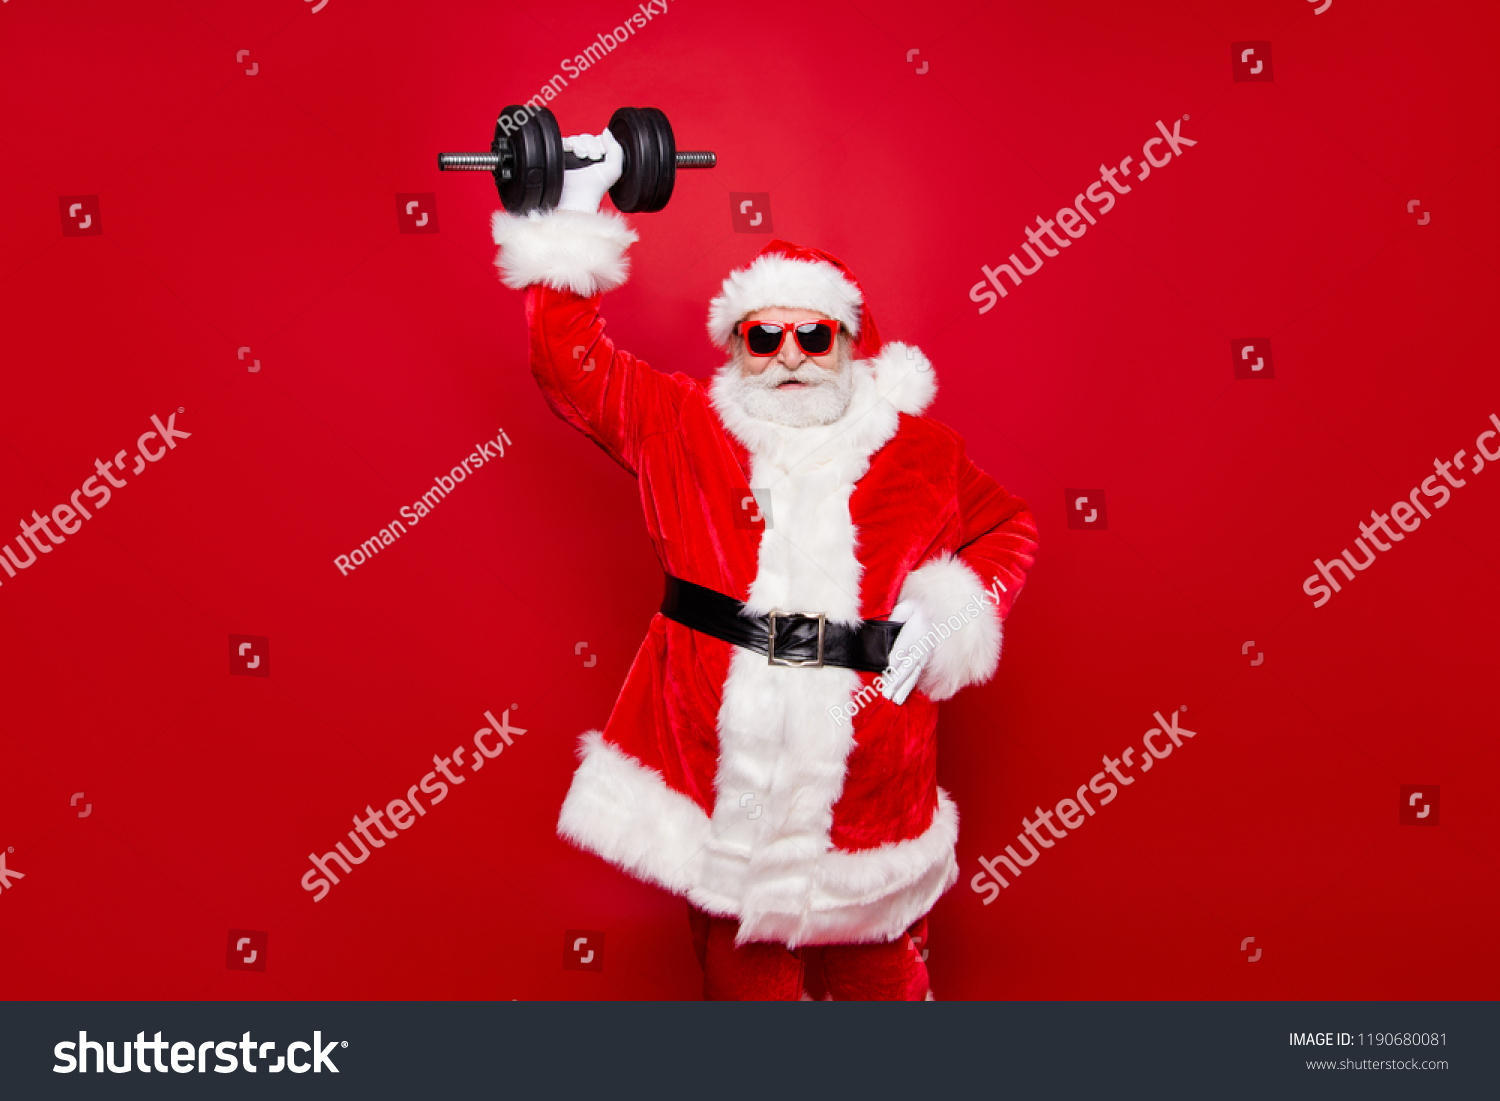 Cheerful funny trendy stylish fashionable strong sporty virile muscular Santa in eyeglasses gloves fur white red winter coat black belt lifting one big dumbbell striving isolated on red background #1190680081